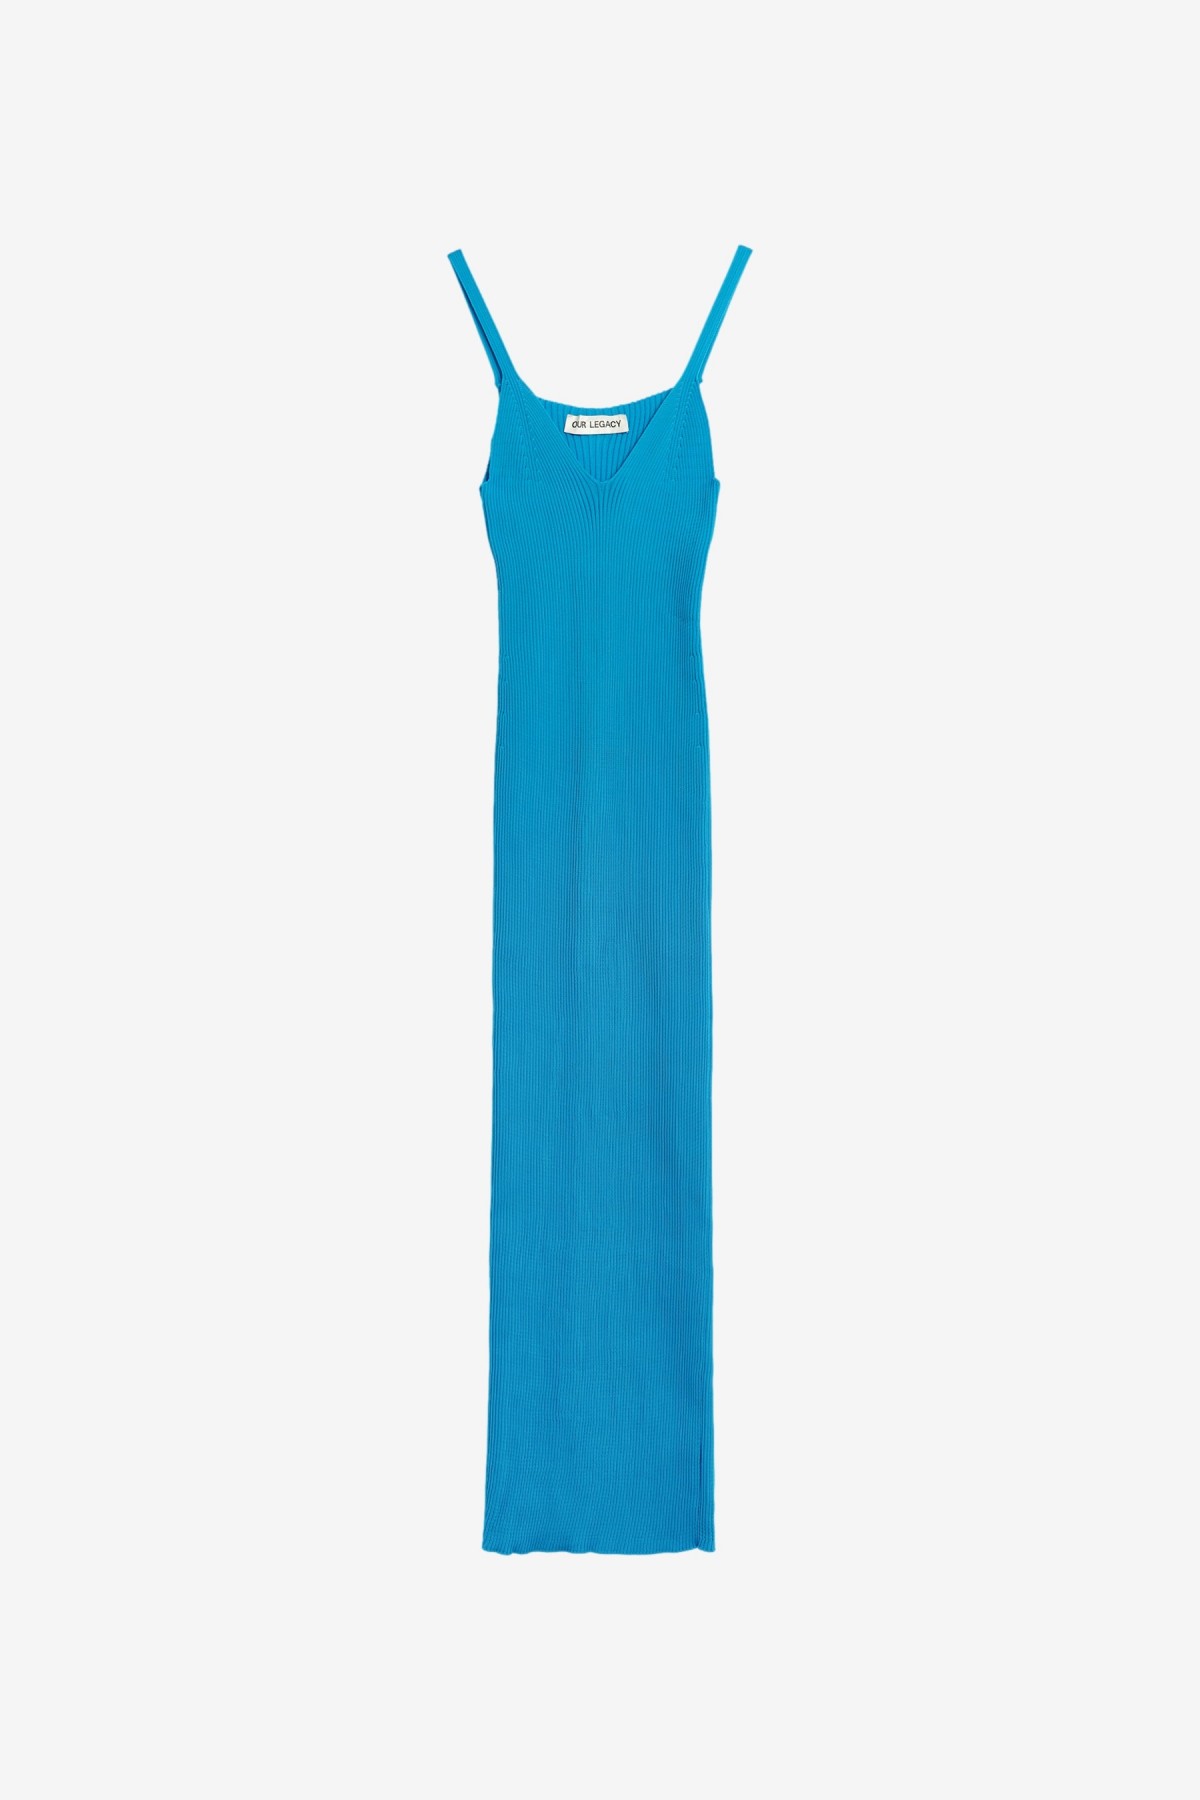 Our Legacy Knitted Singlet Dress in Circuit Blue Performance Poly